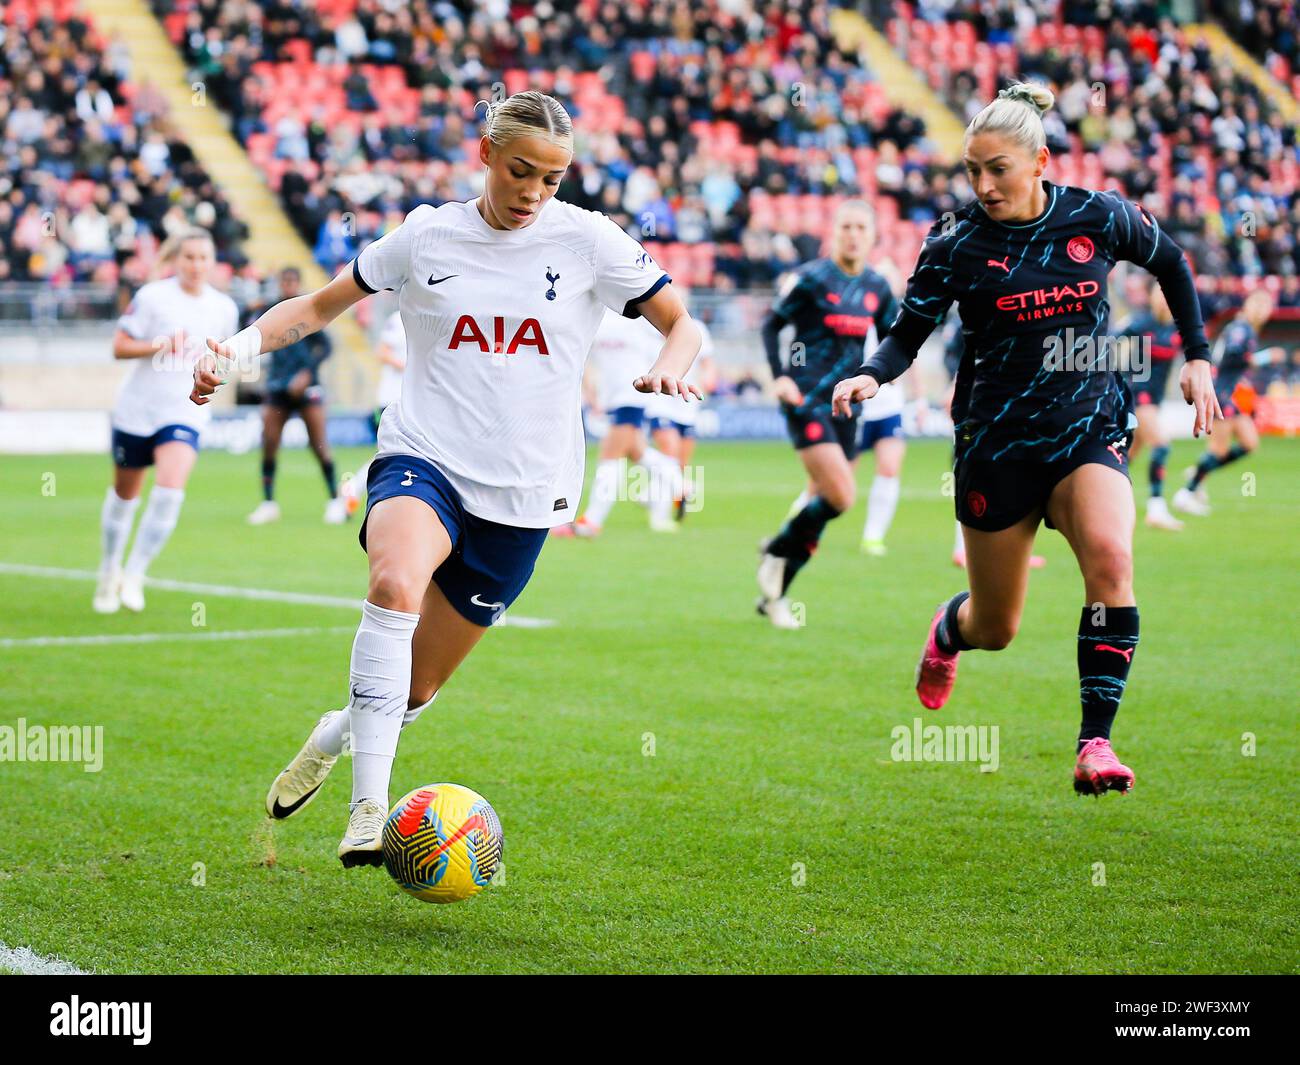 London, UK. 28th Jan, 2024. London, England, January 28 2024: Celin Bizet Ildhusoy (14 Tottenham Hotspur) and Laura Coombs (7 Manchester City) battle for the ball during the Barclays FA Womens Super League game between Tottenham Hotspur and Manchester City at Brisbane Road in London, England. (Jay Patel/SPP) Credit: SPP Sport Press Photo. /Alamy Live News Stock Photo